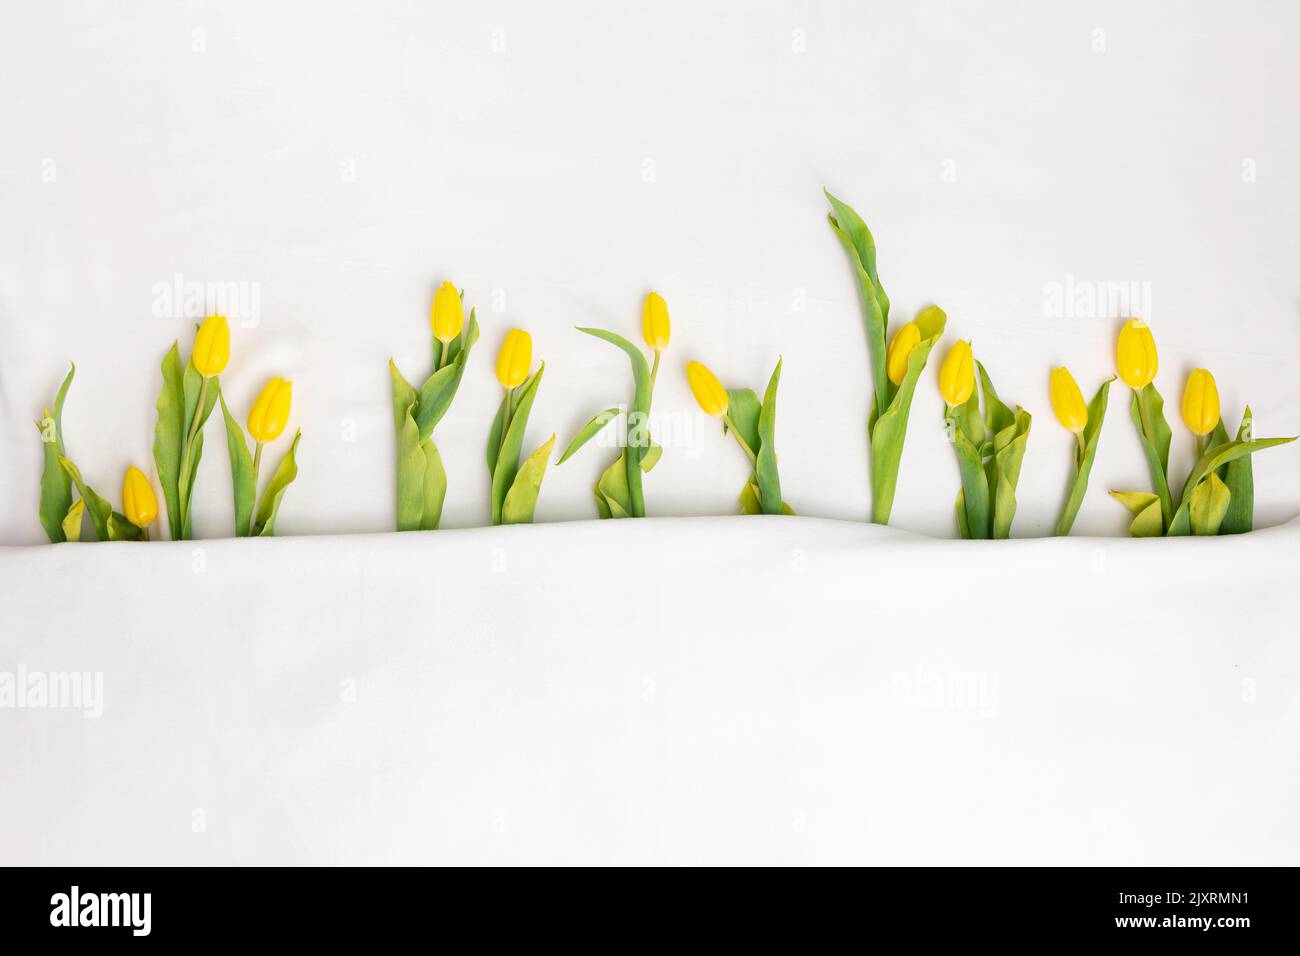 a simple row of yellow tulips in a row peeking out of a blanket as a spring background with copy space. Stock Photo